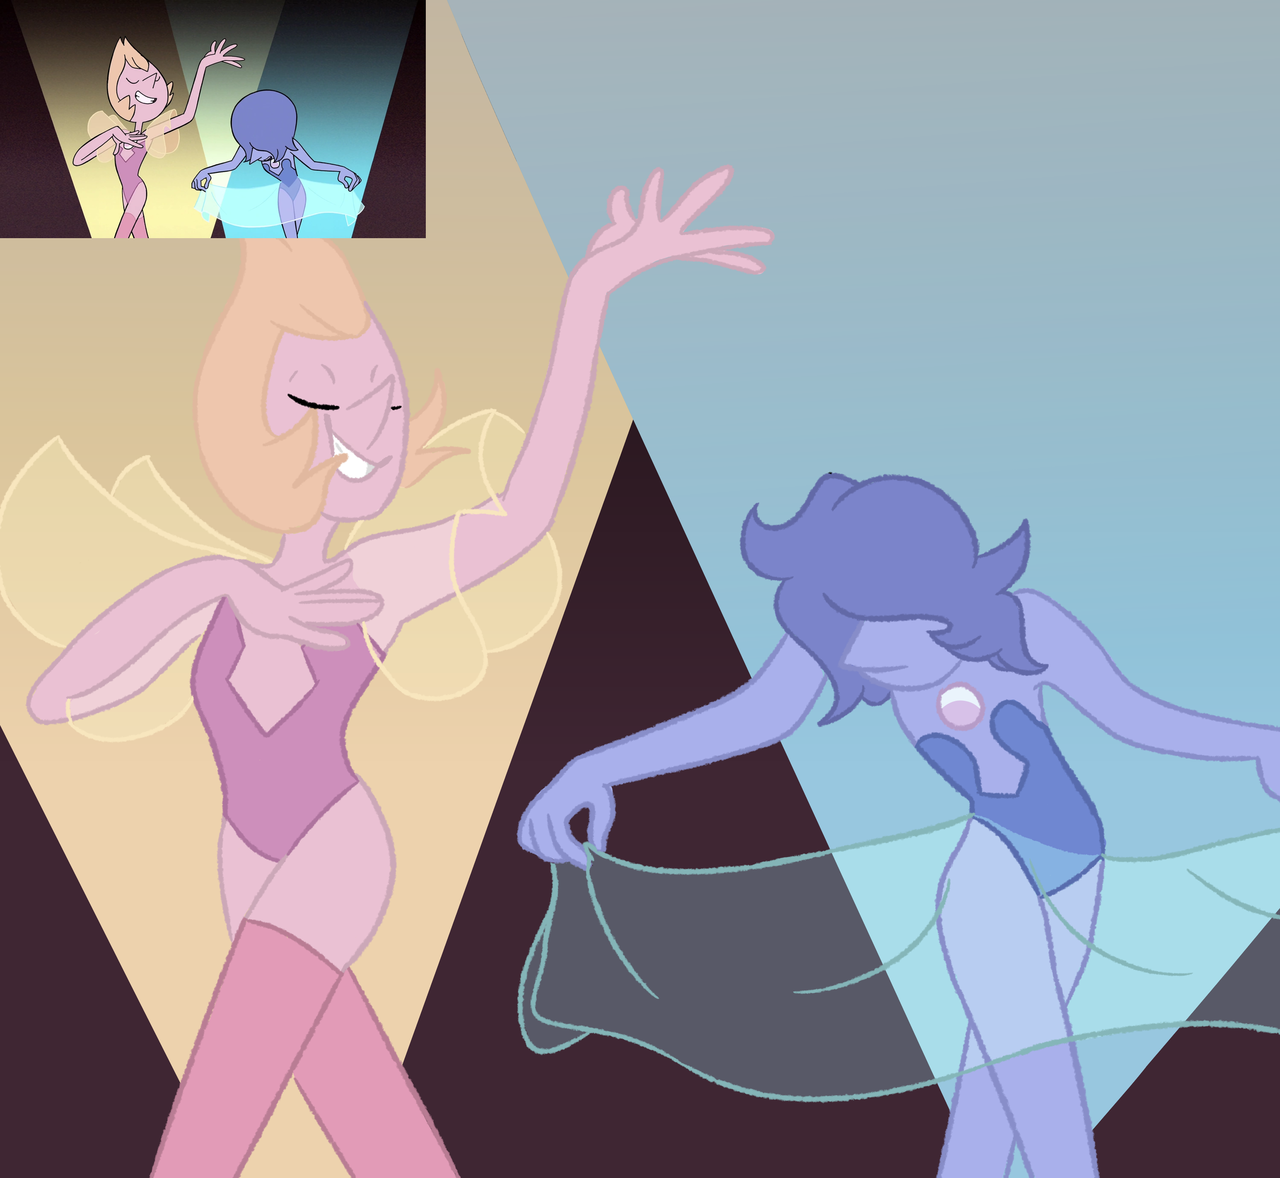 I did a redraw of the pearls from The Trial and I like how it turned out Watch the speedpaint i did for it here: https://www.youtube.com/watch?v=lSpVQxnXbjc&feature=youtu.be